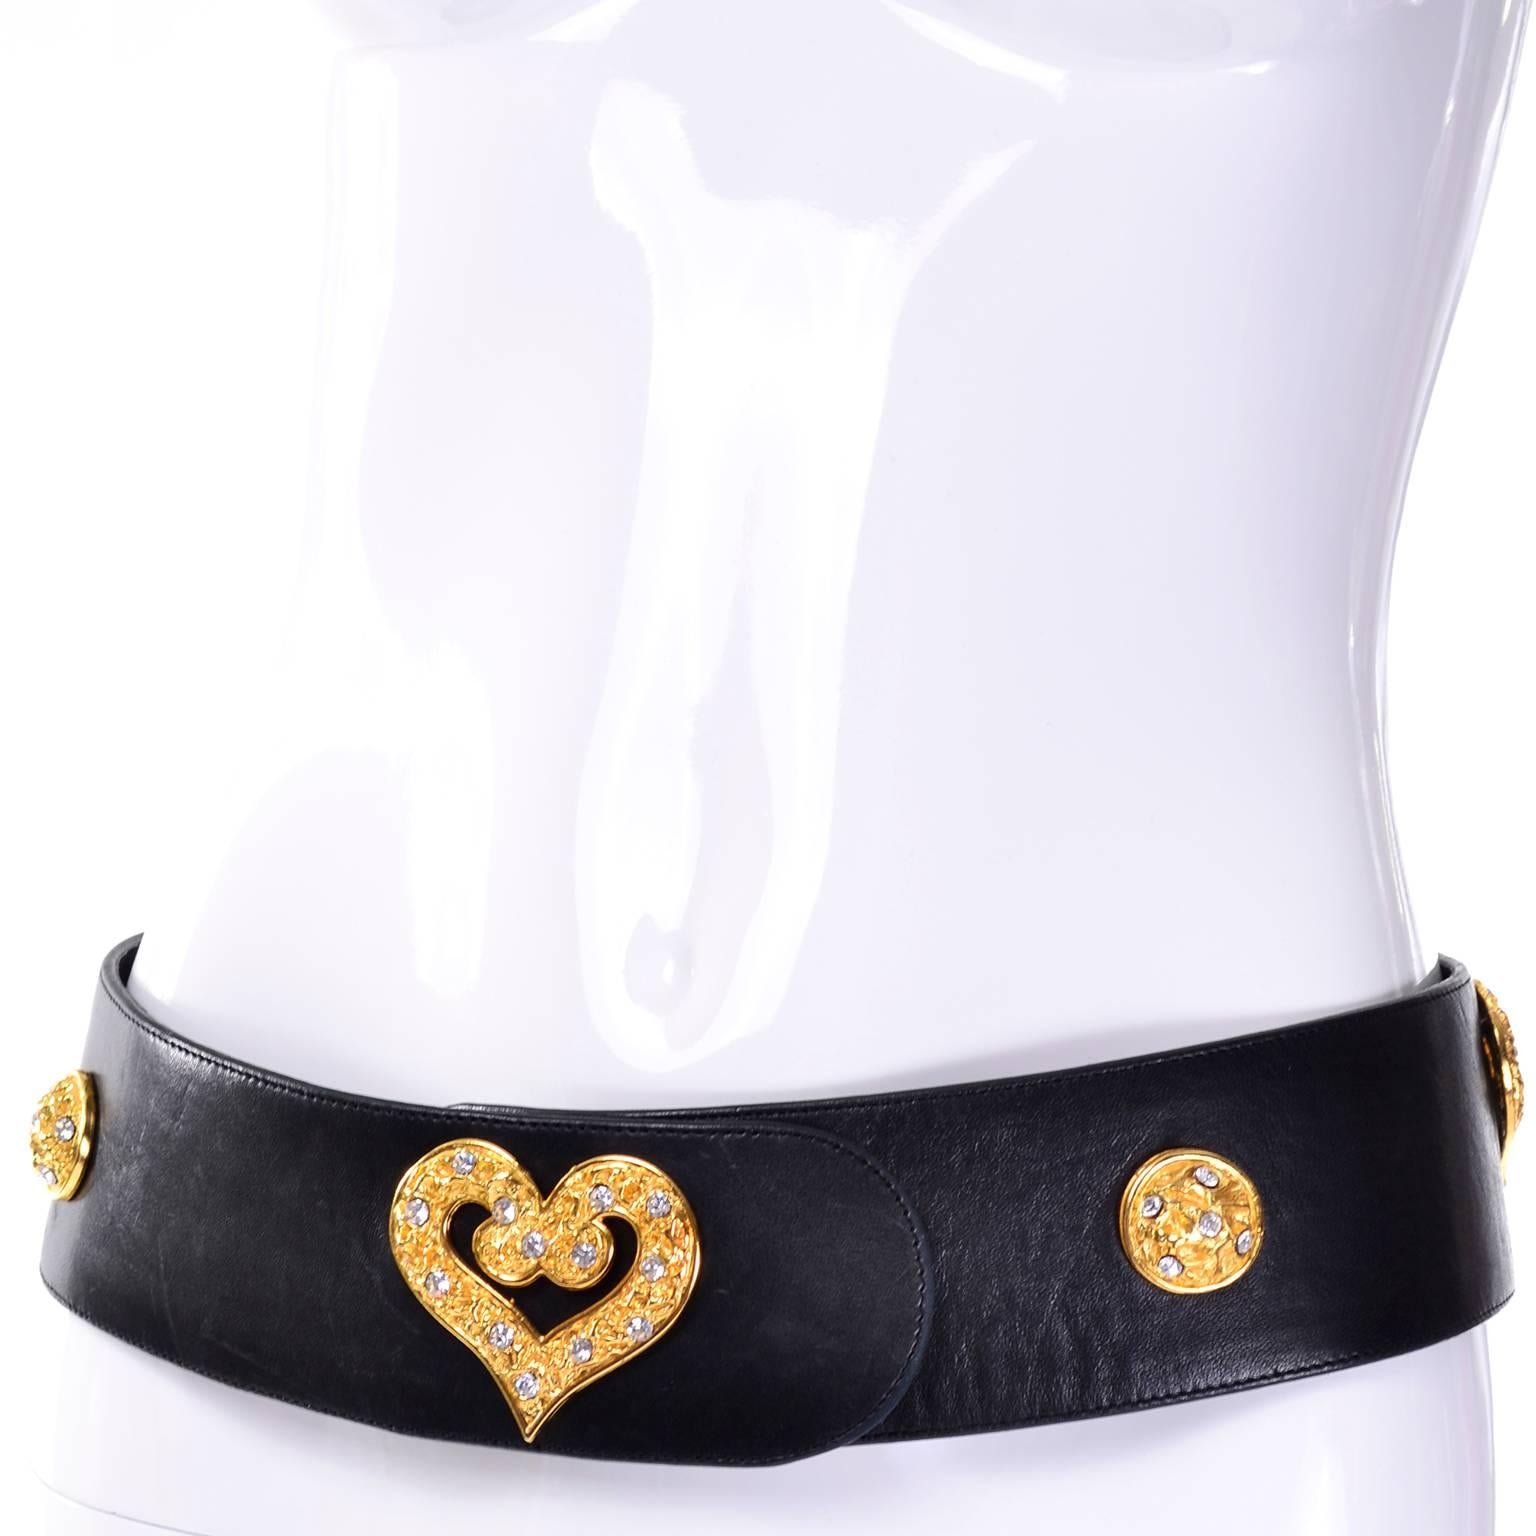 This vintage 1980's black leather belt was designed by Edouard Rambaud and it is beautifully embellished with gold hearts and gold domes with rhinestones.  The belt is 2 and 1/2